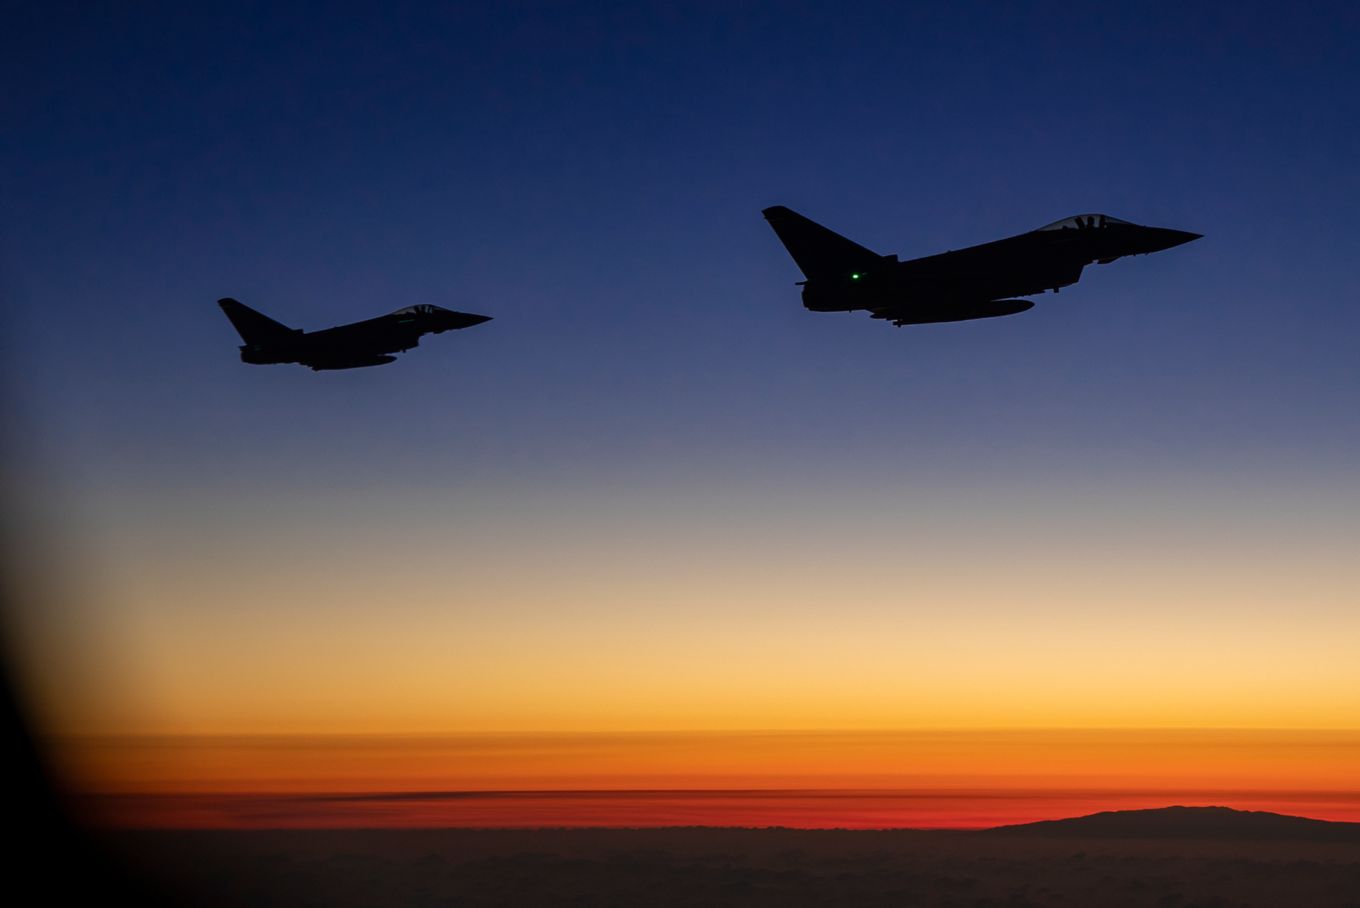 The C-130J Hercules was escorted by two Typhoons.